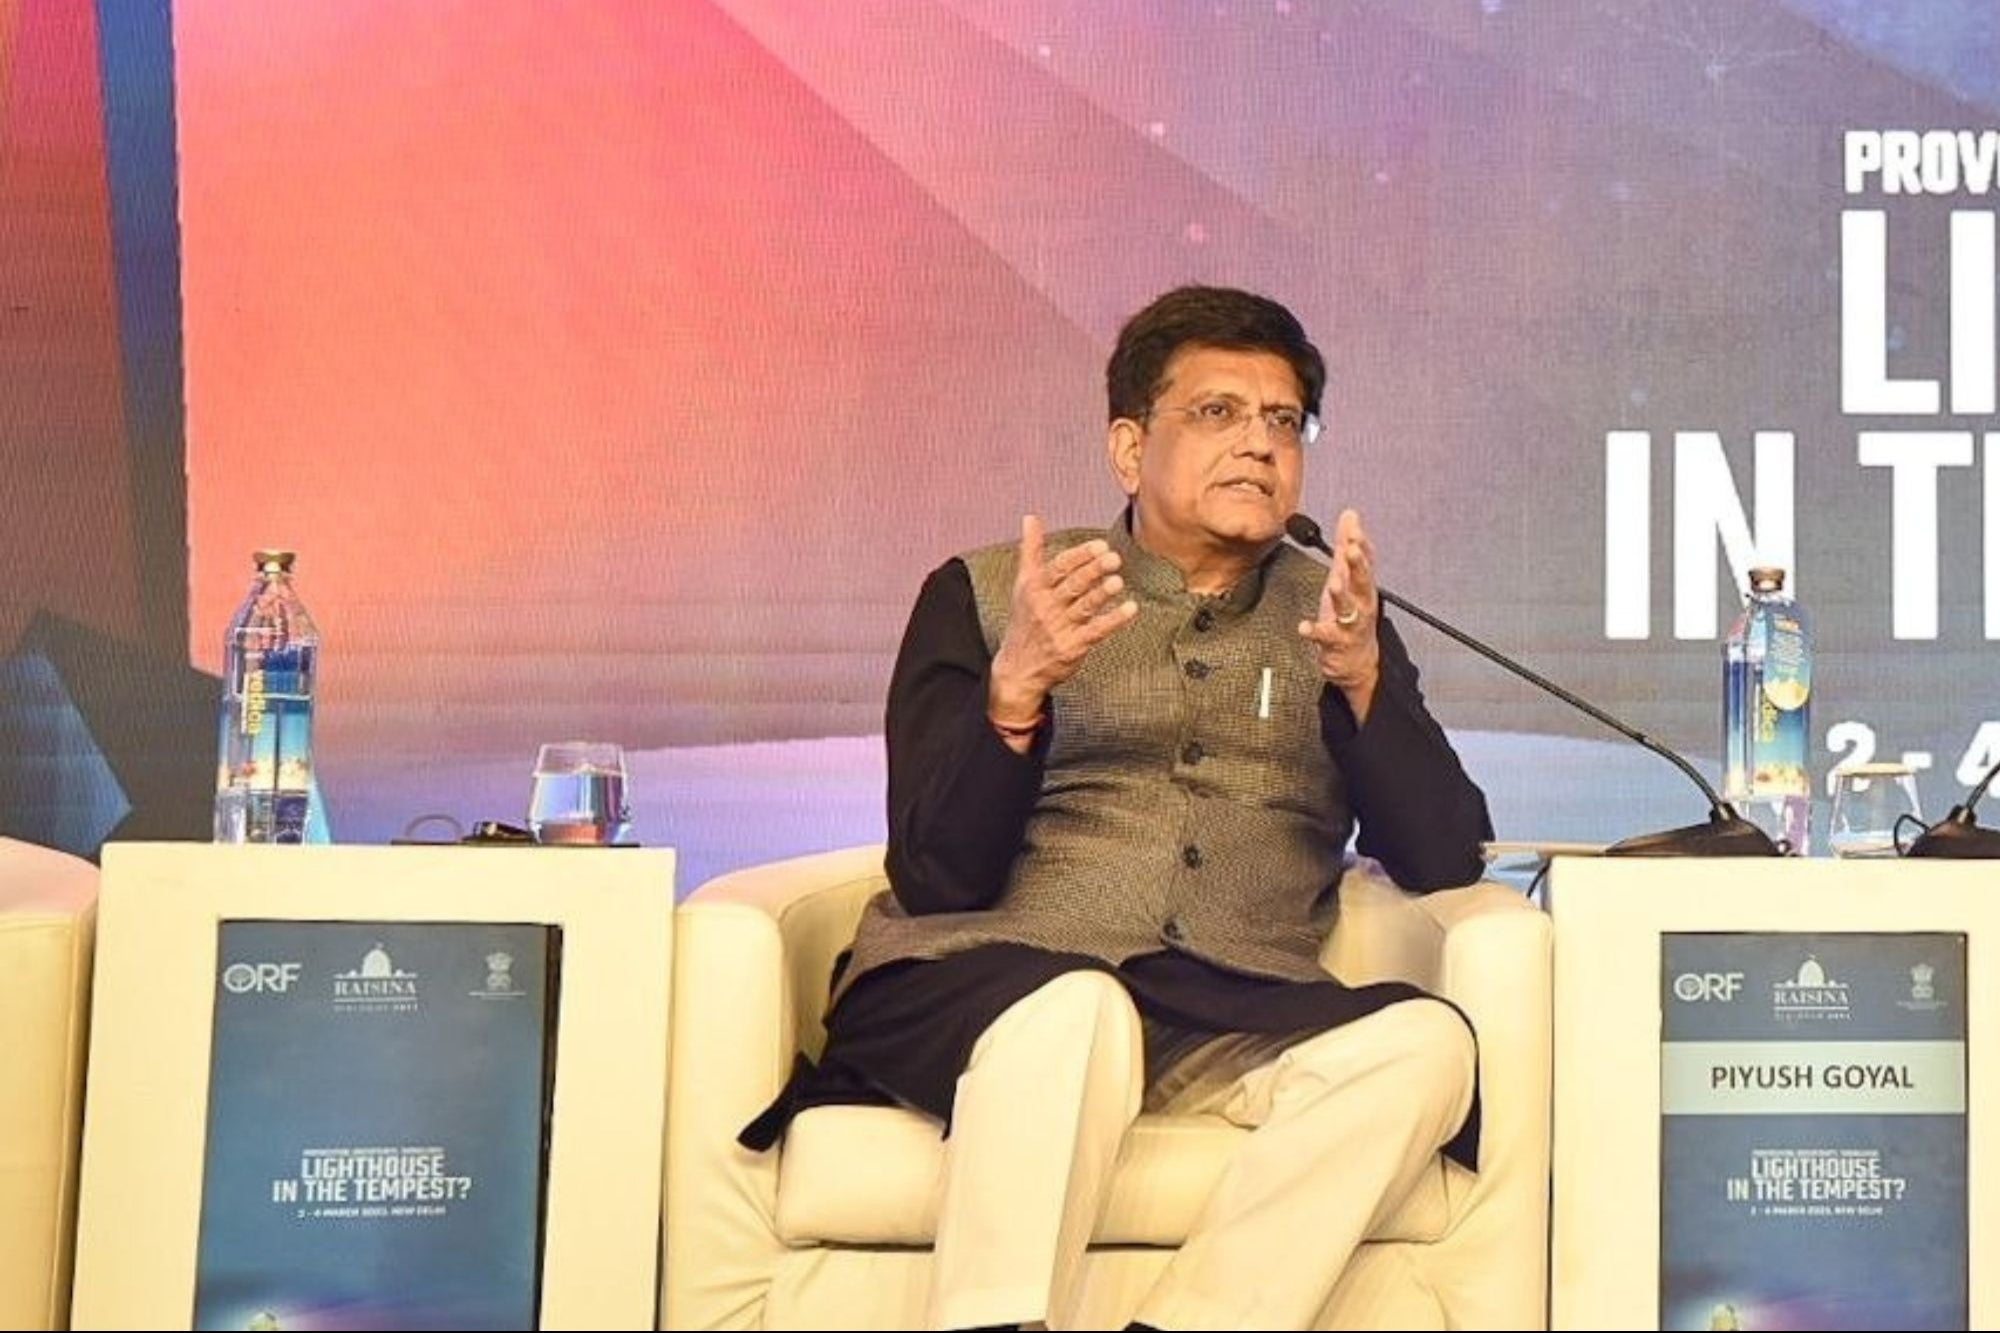 ONDC Will Help Small Retail Survive Onslaught Of Large Tech-Based Ecommerce Firms, Says Piyush Goyal